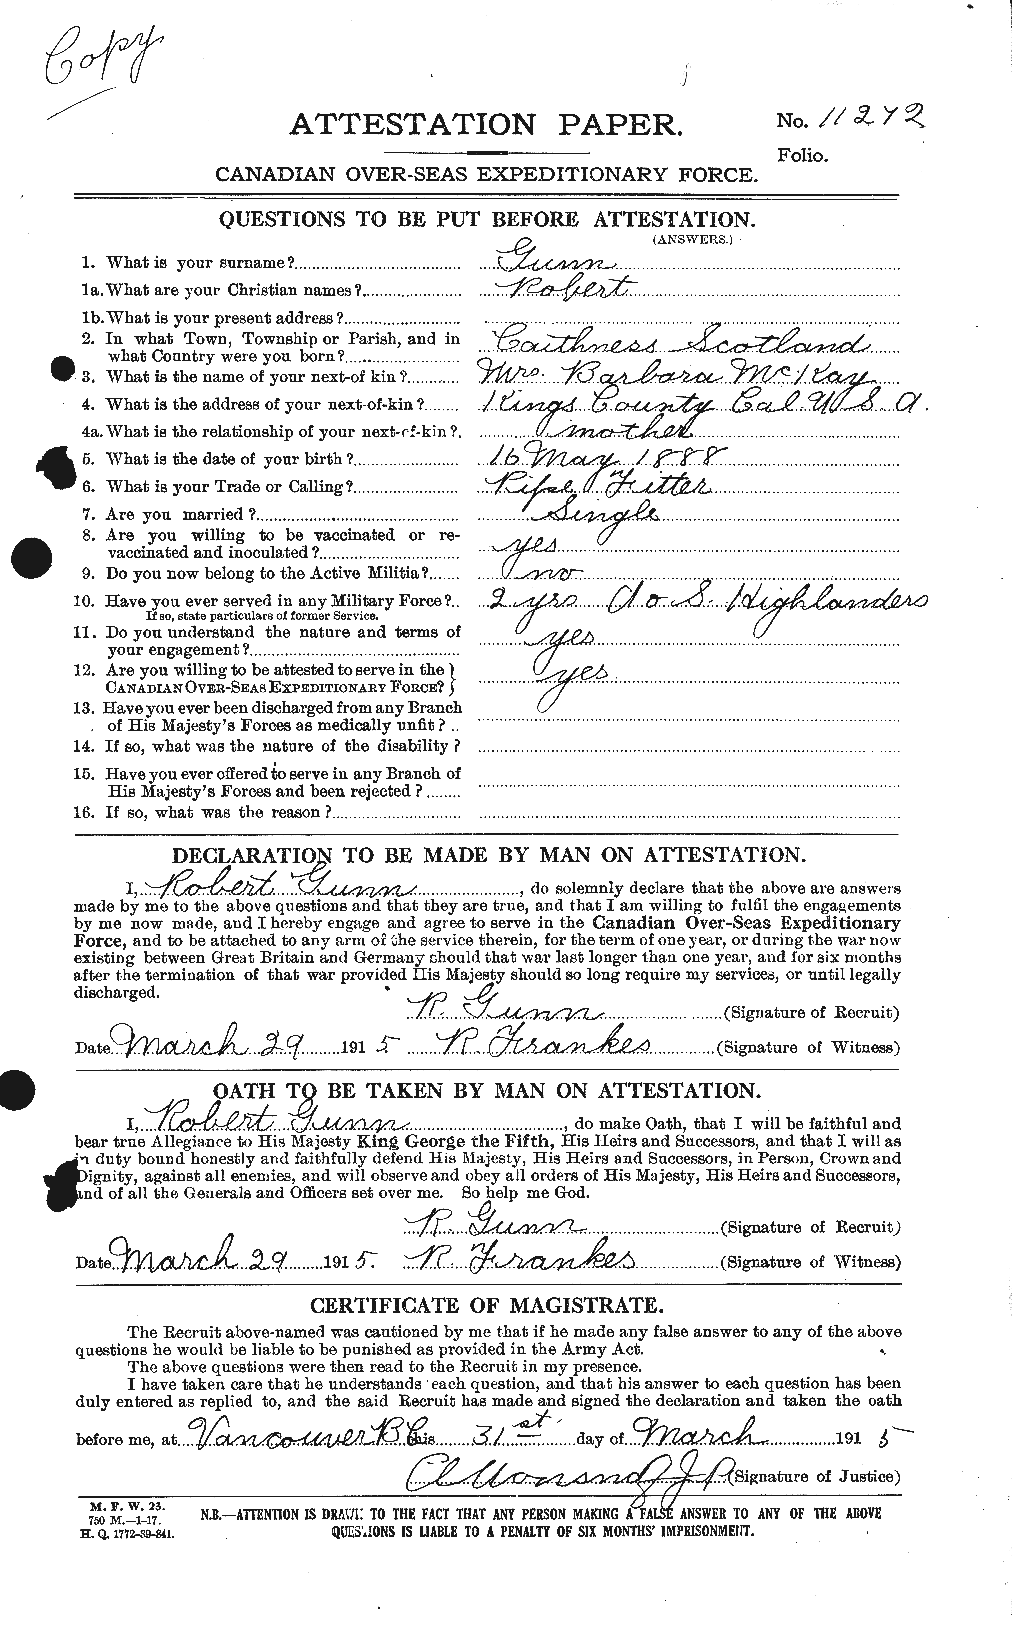 Personnel Records of the First World War - CEF 369324a